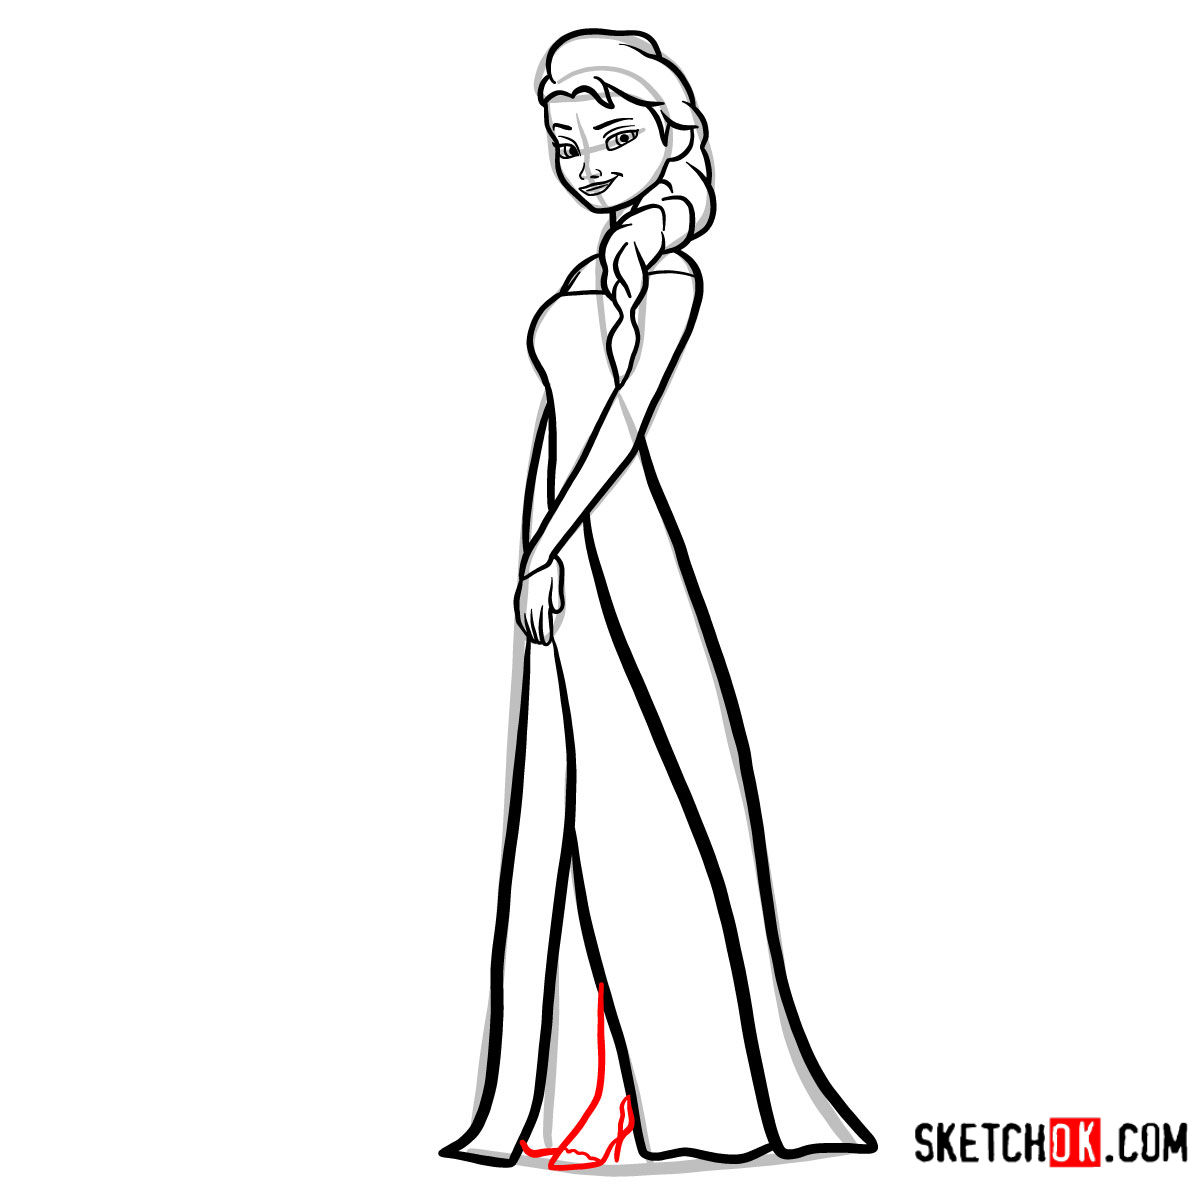 How to draw Princess Elsa | Frozen - step 09